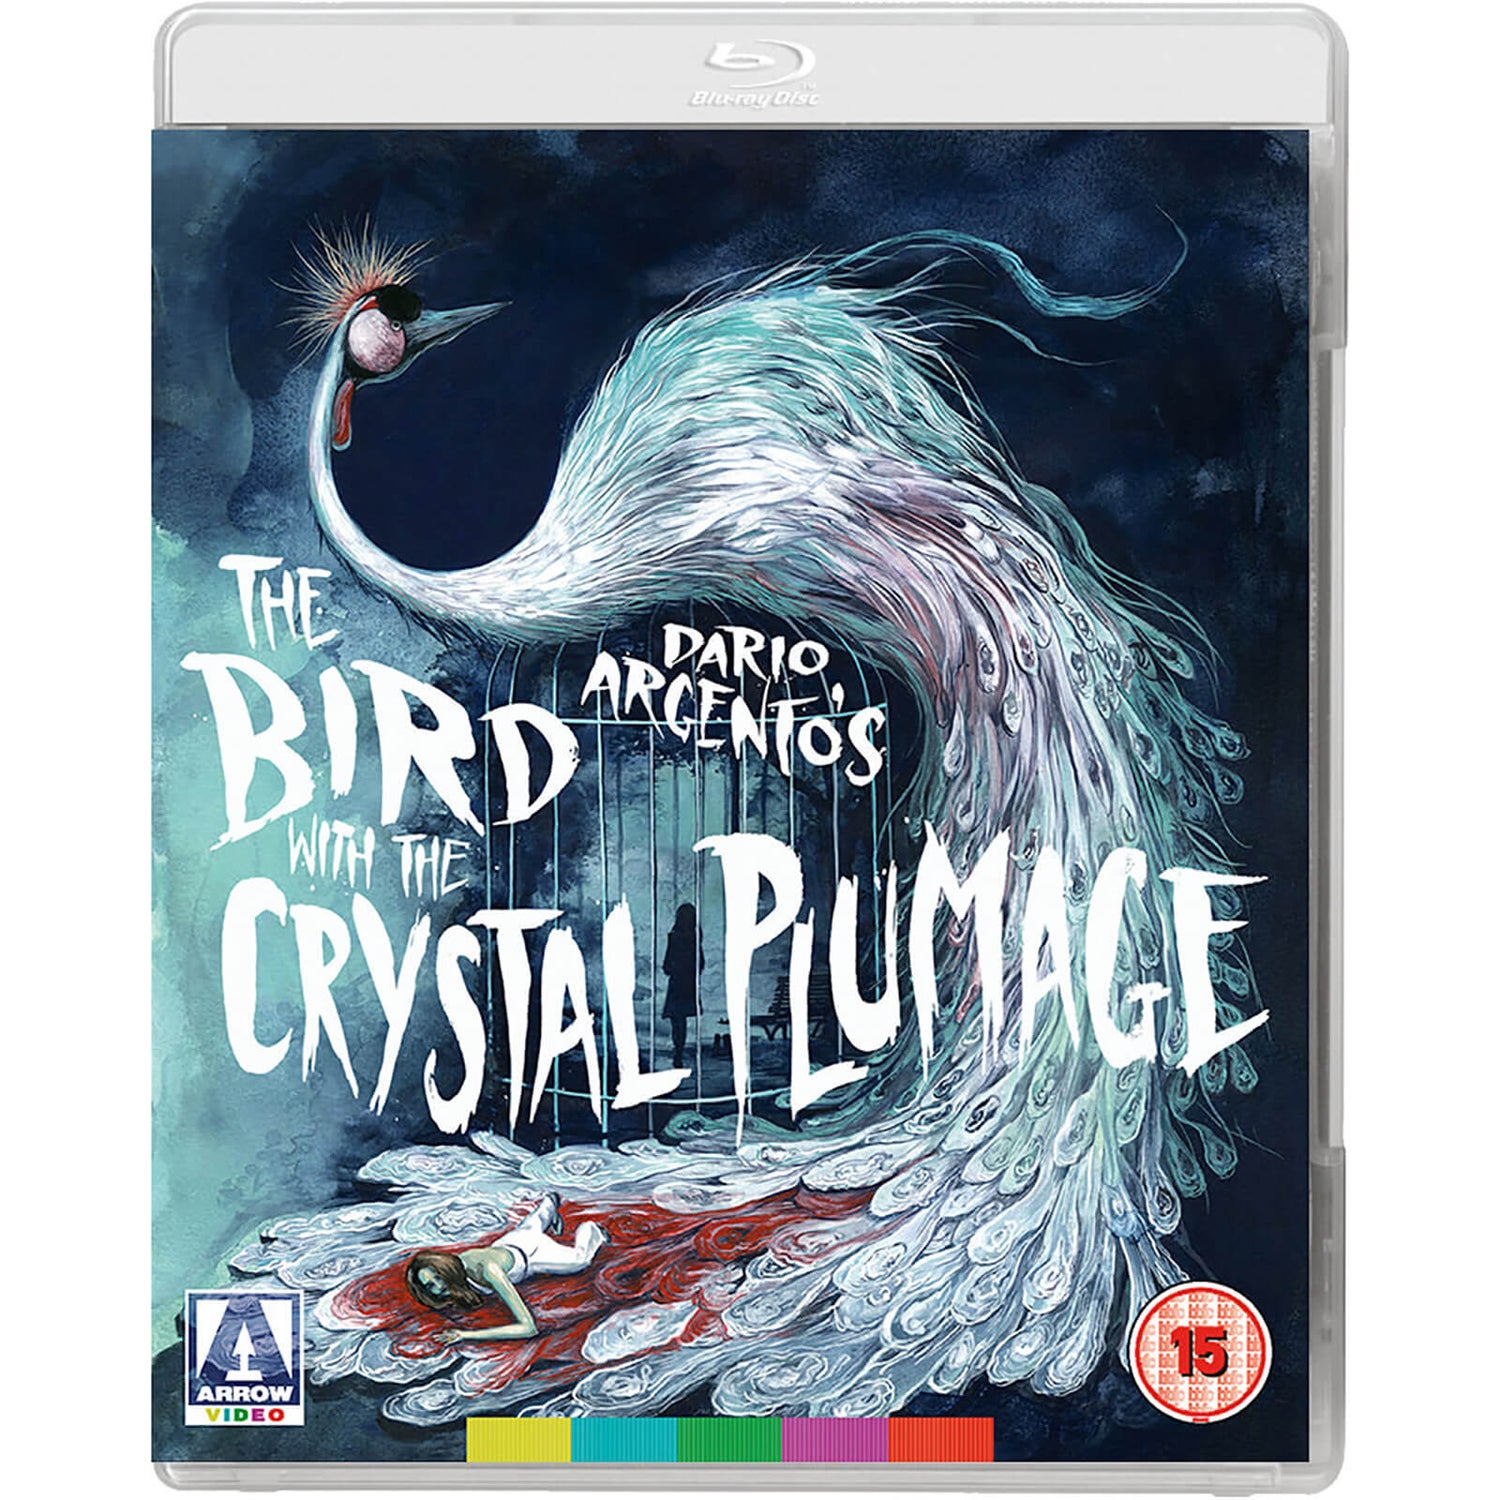 The Bird with the Crystal Plumage - Dual Format (Includes DVD) (Limited Edition)